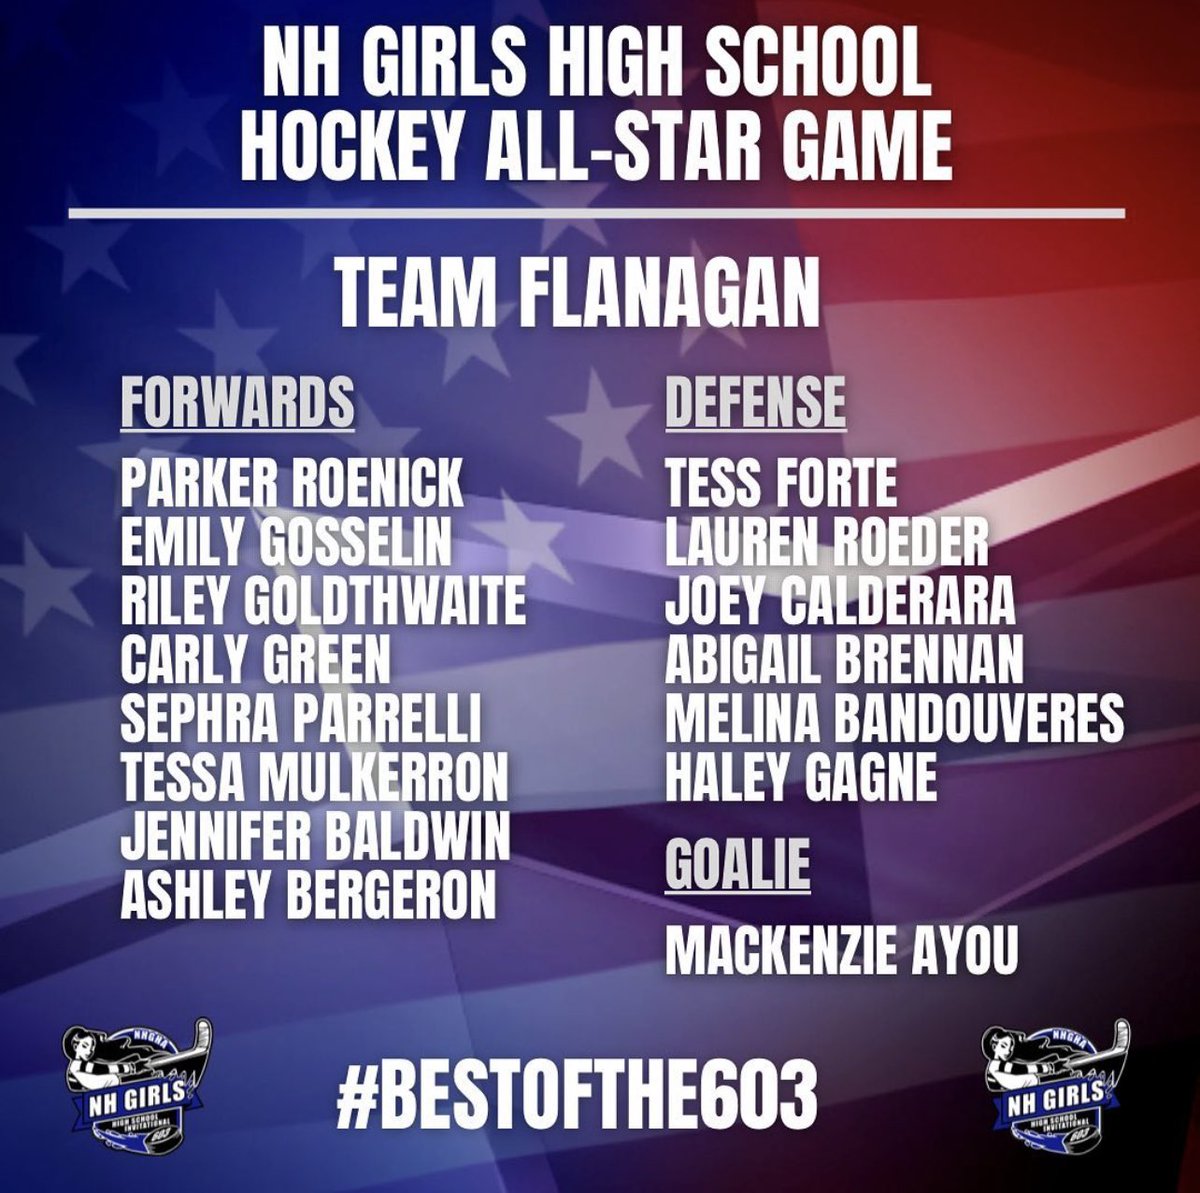 Excited to represent Team Flanagan today in the #bestofthe603 NH High School Hockey Classic! @flanagko @holdernessgvh @TeamHolderness